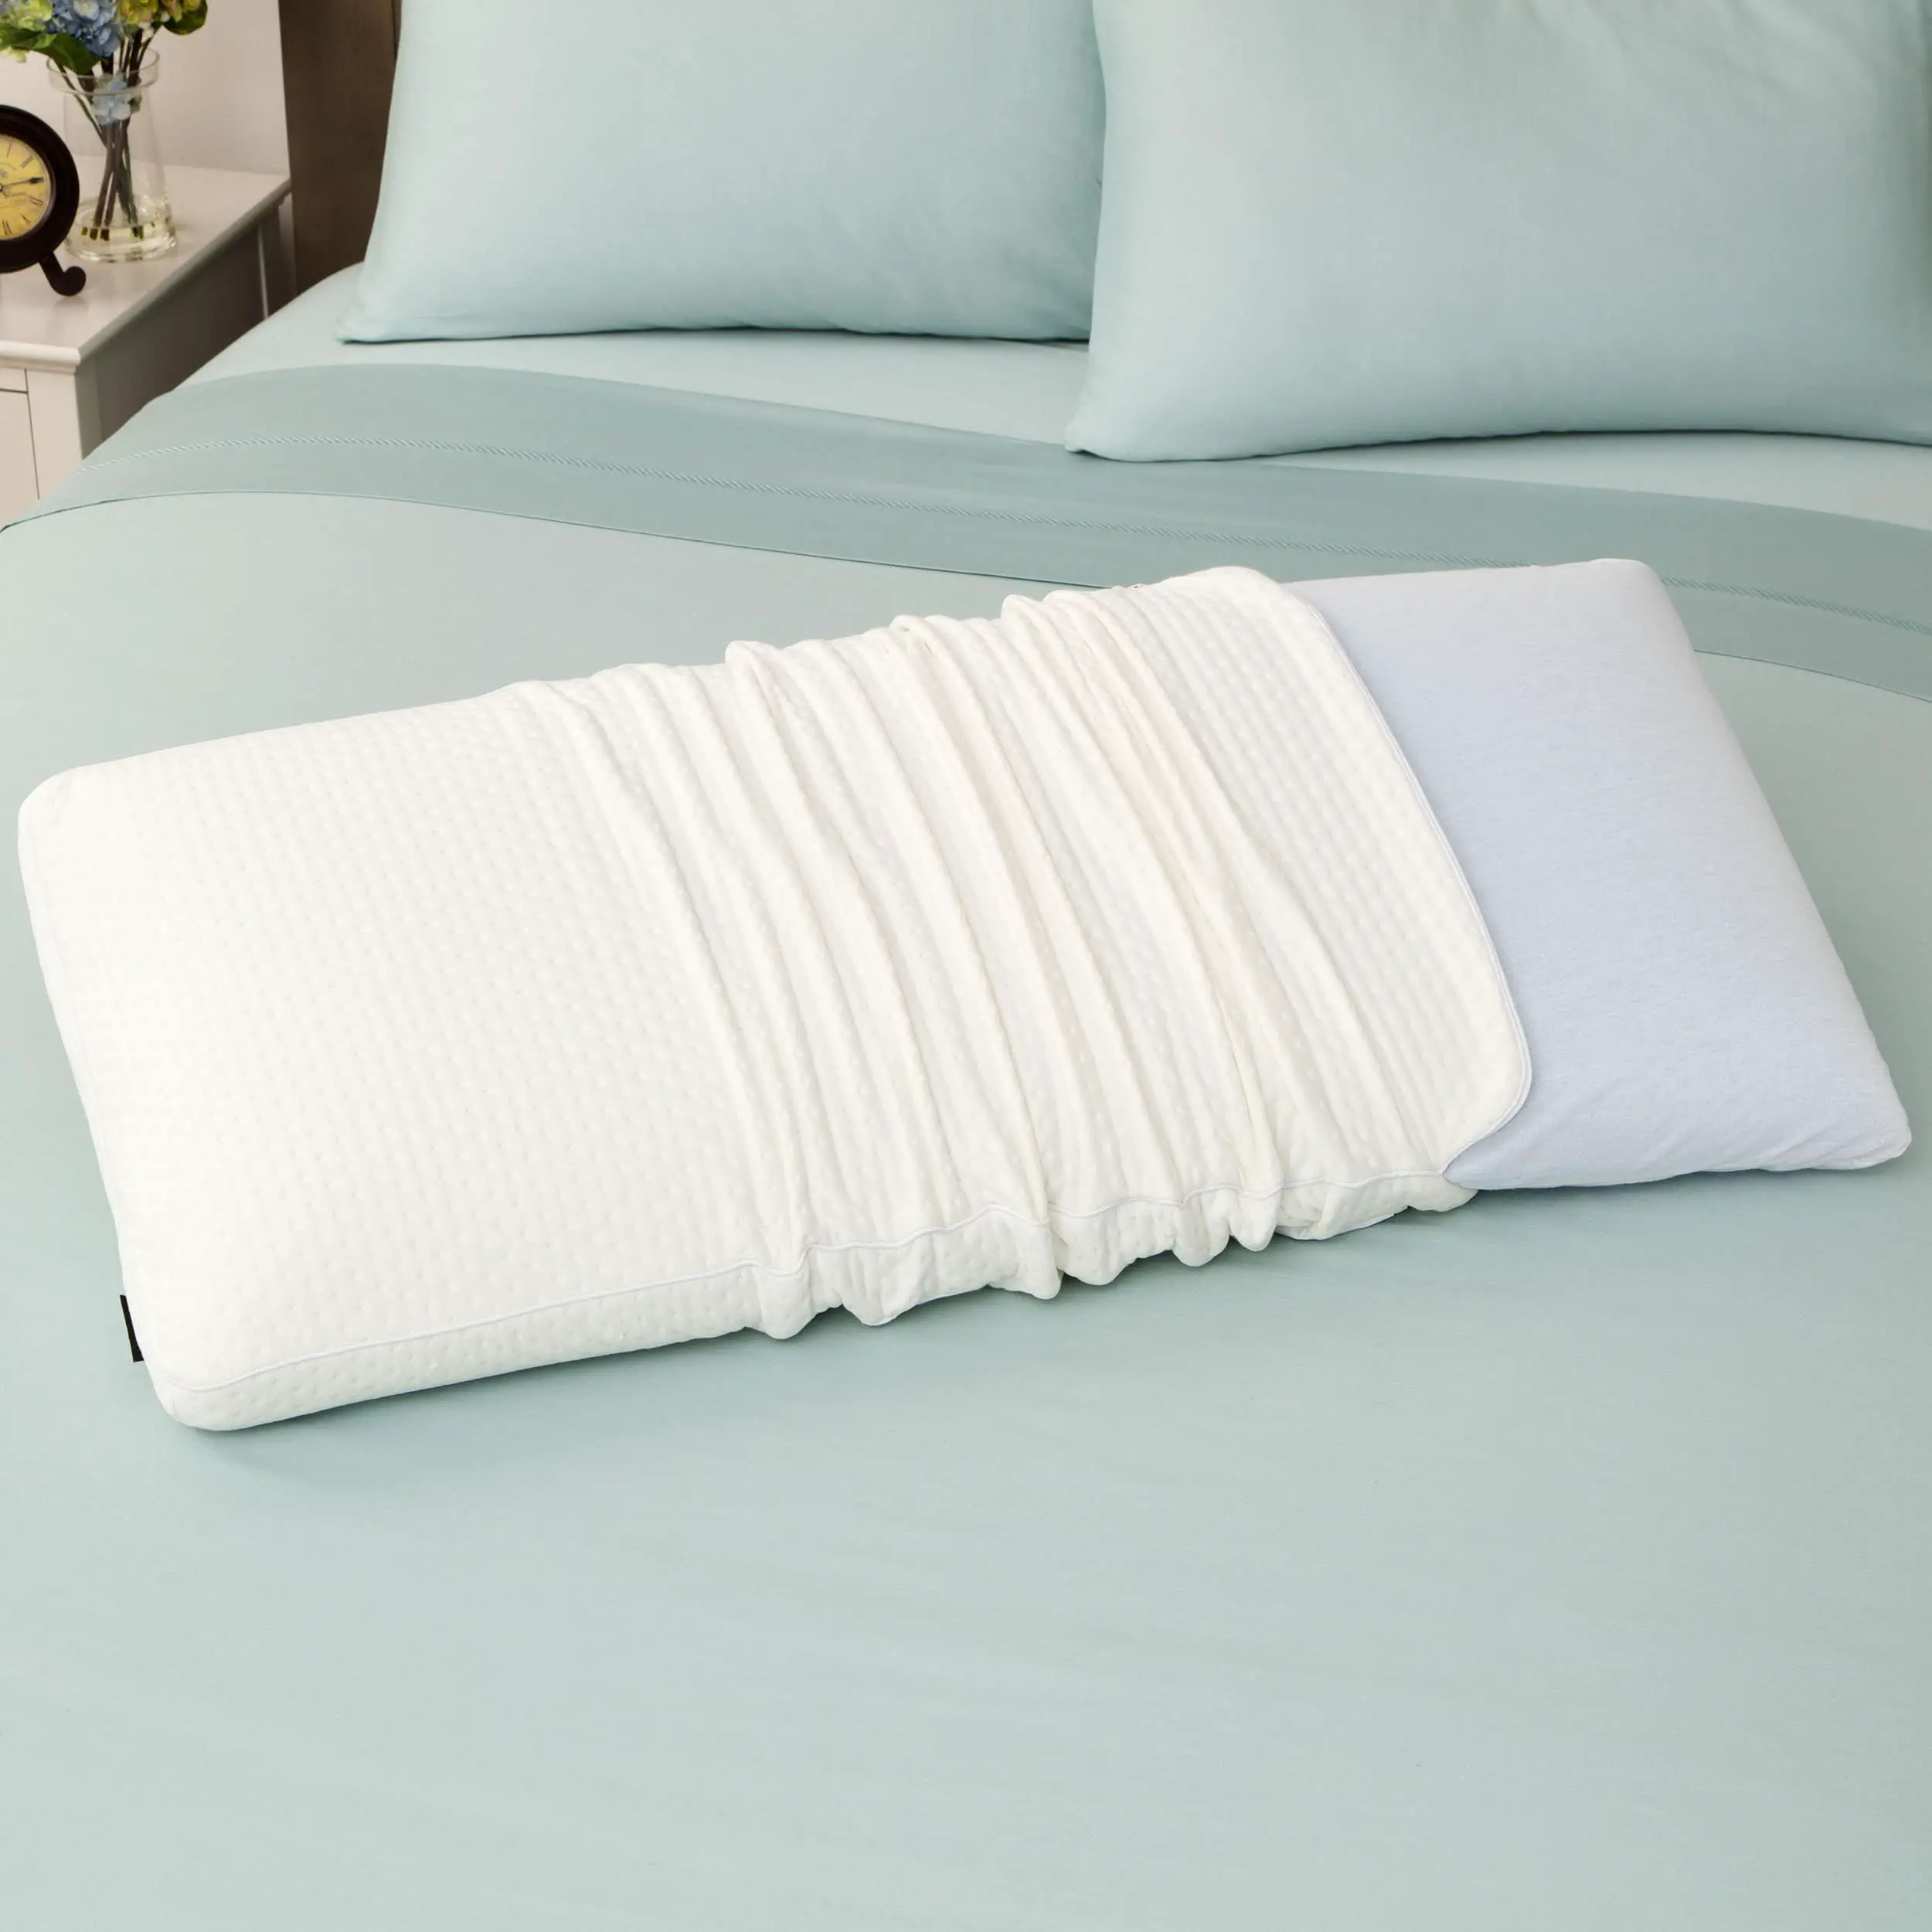 King Size Memory Foam Pillows : Stearns And Foster Memory Foam Pillow ...